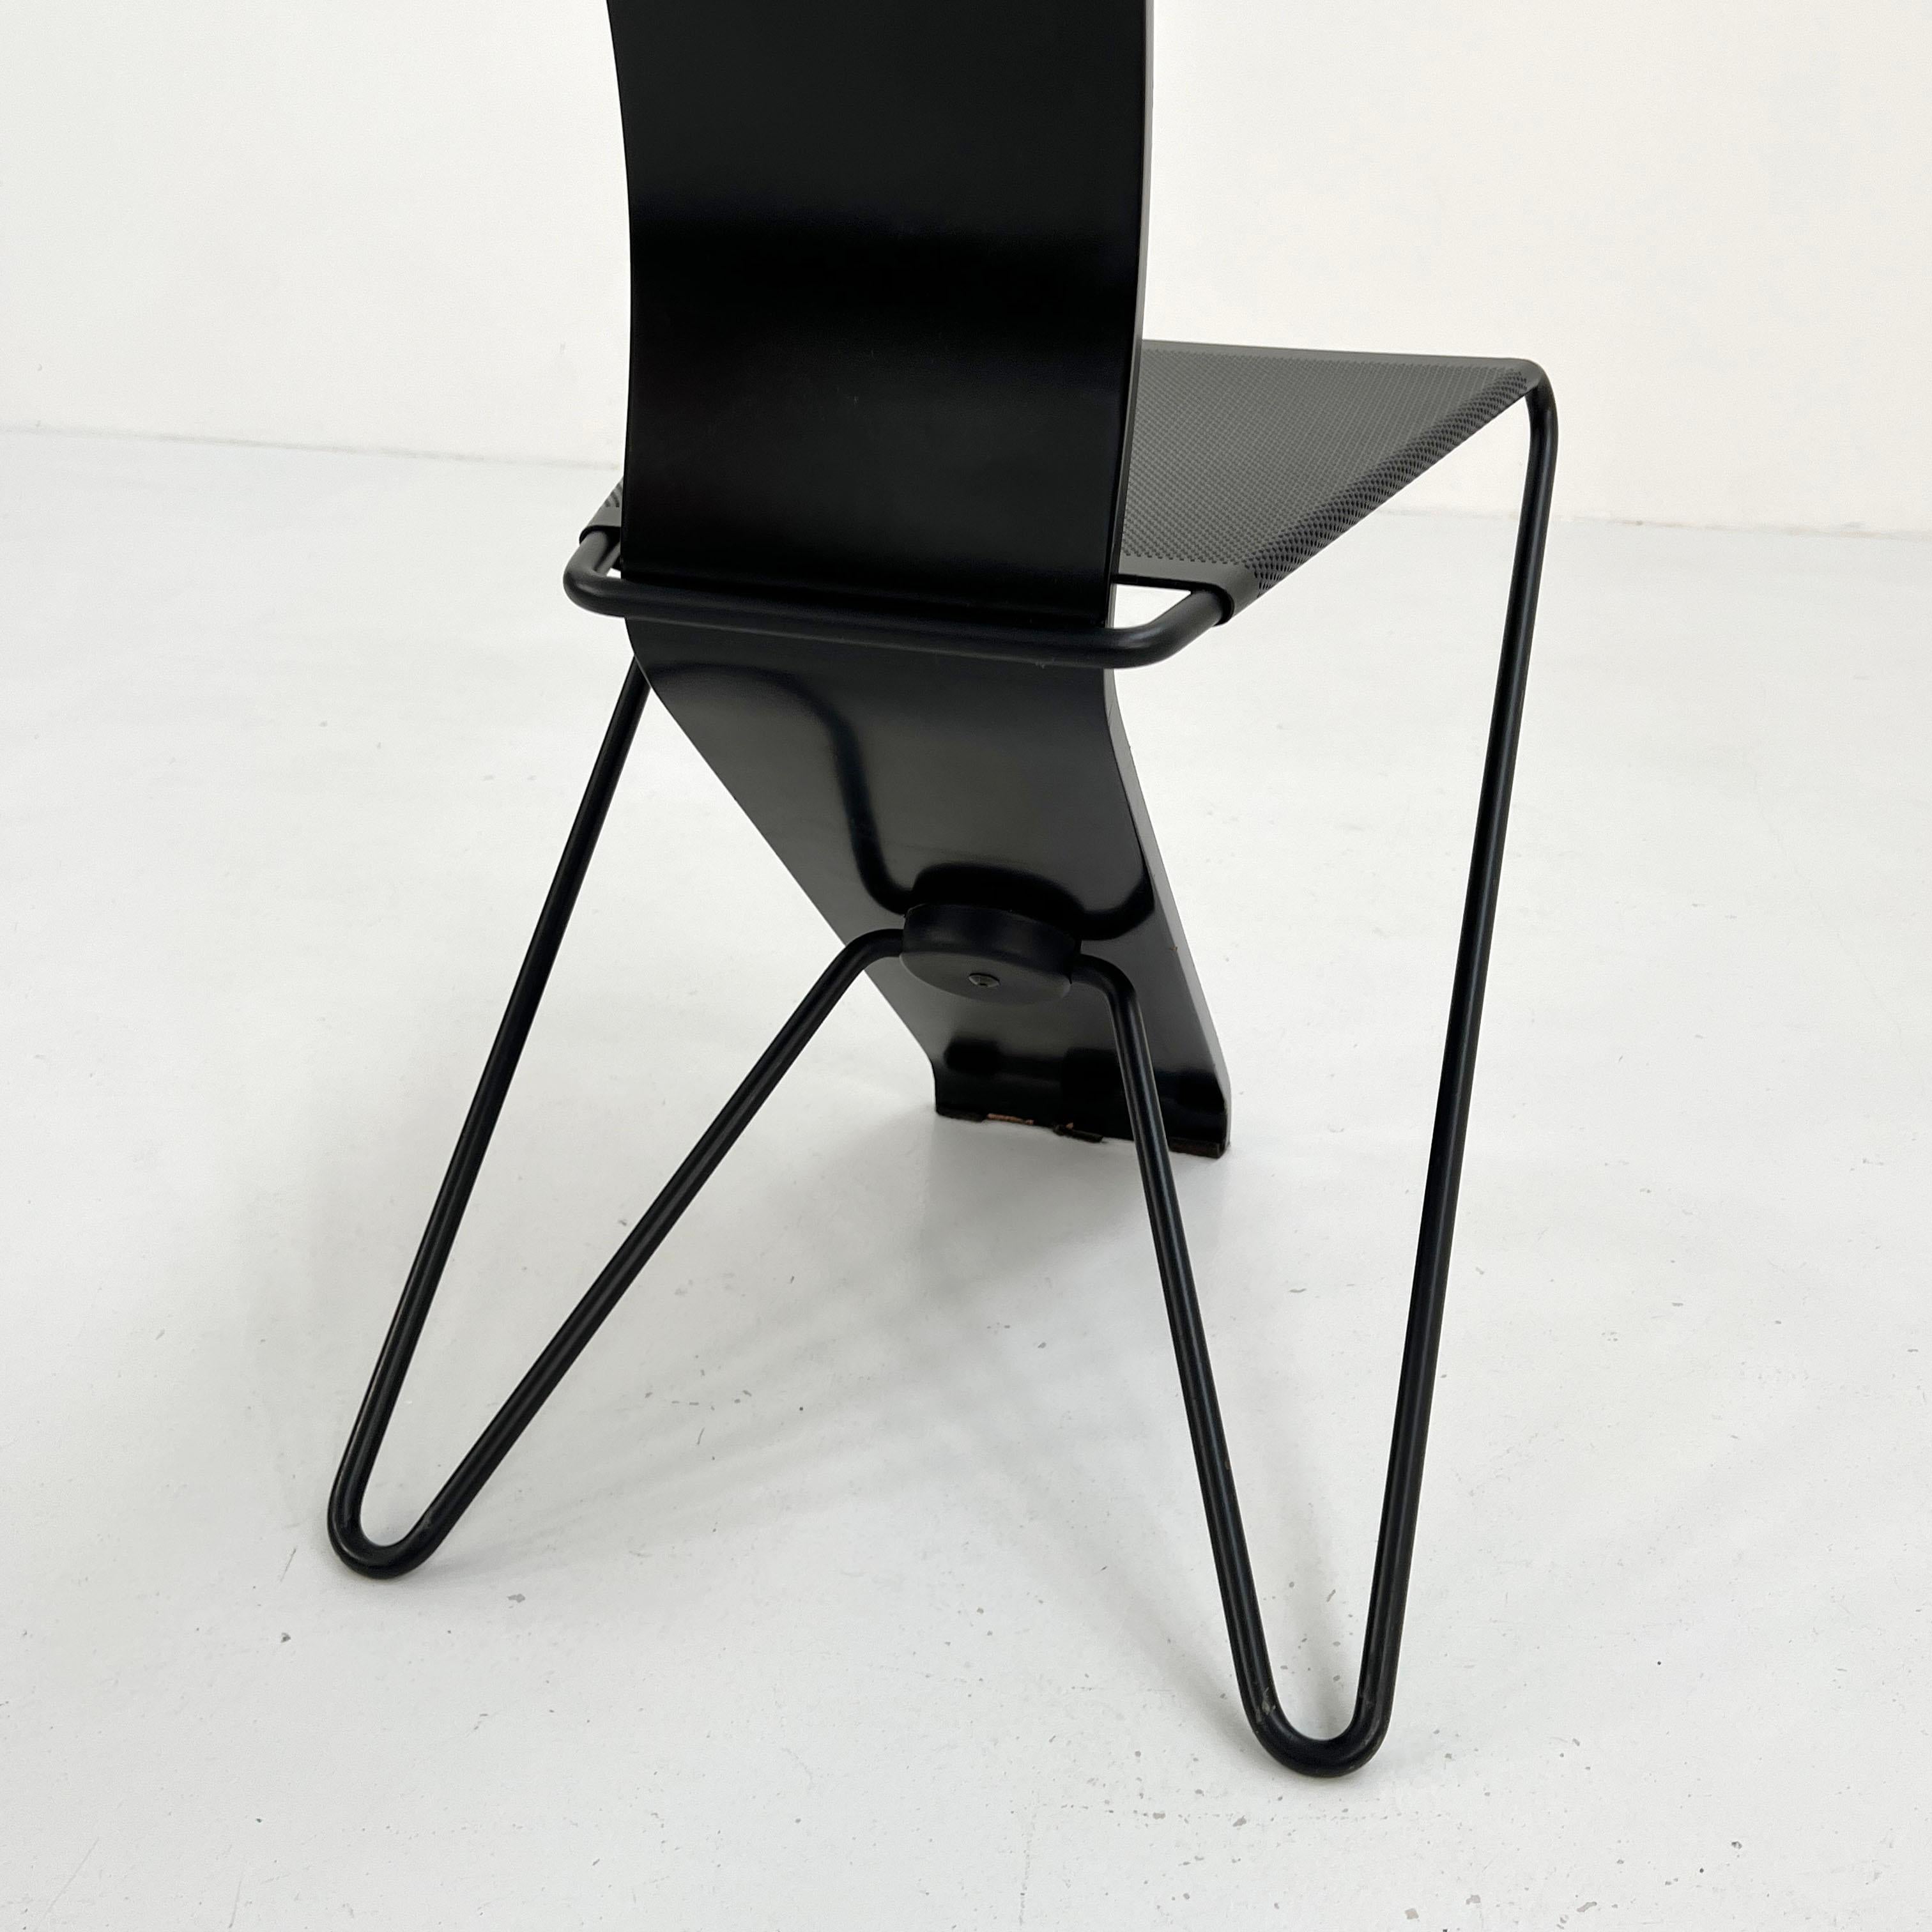 Postmodern High Backed Metal Chair from Pietro Arosio, 1980s For Sale 3